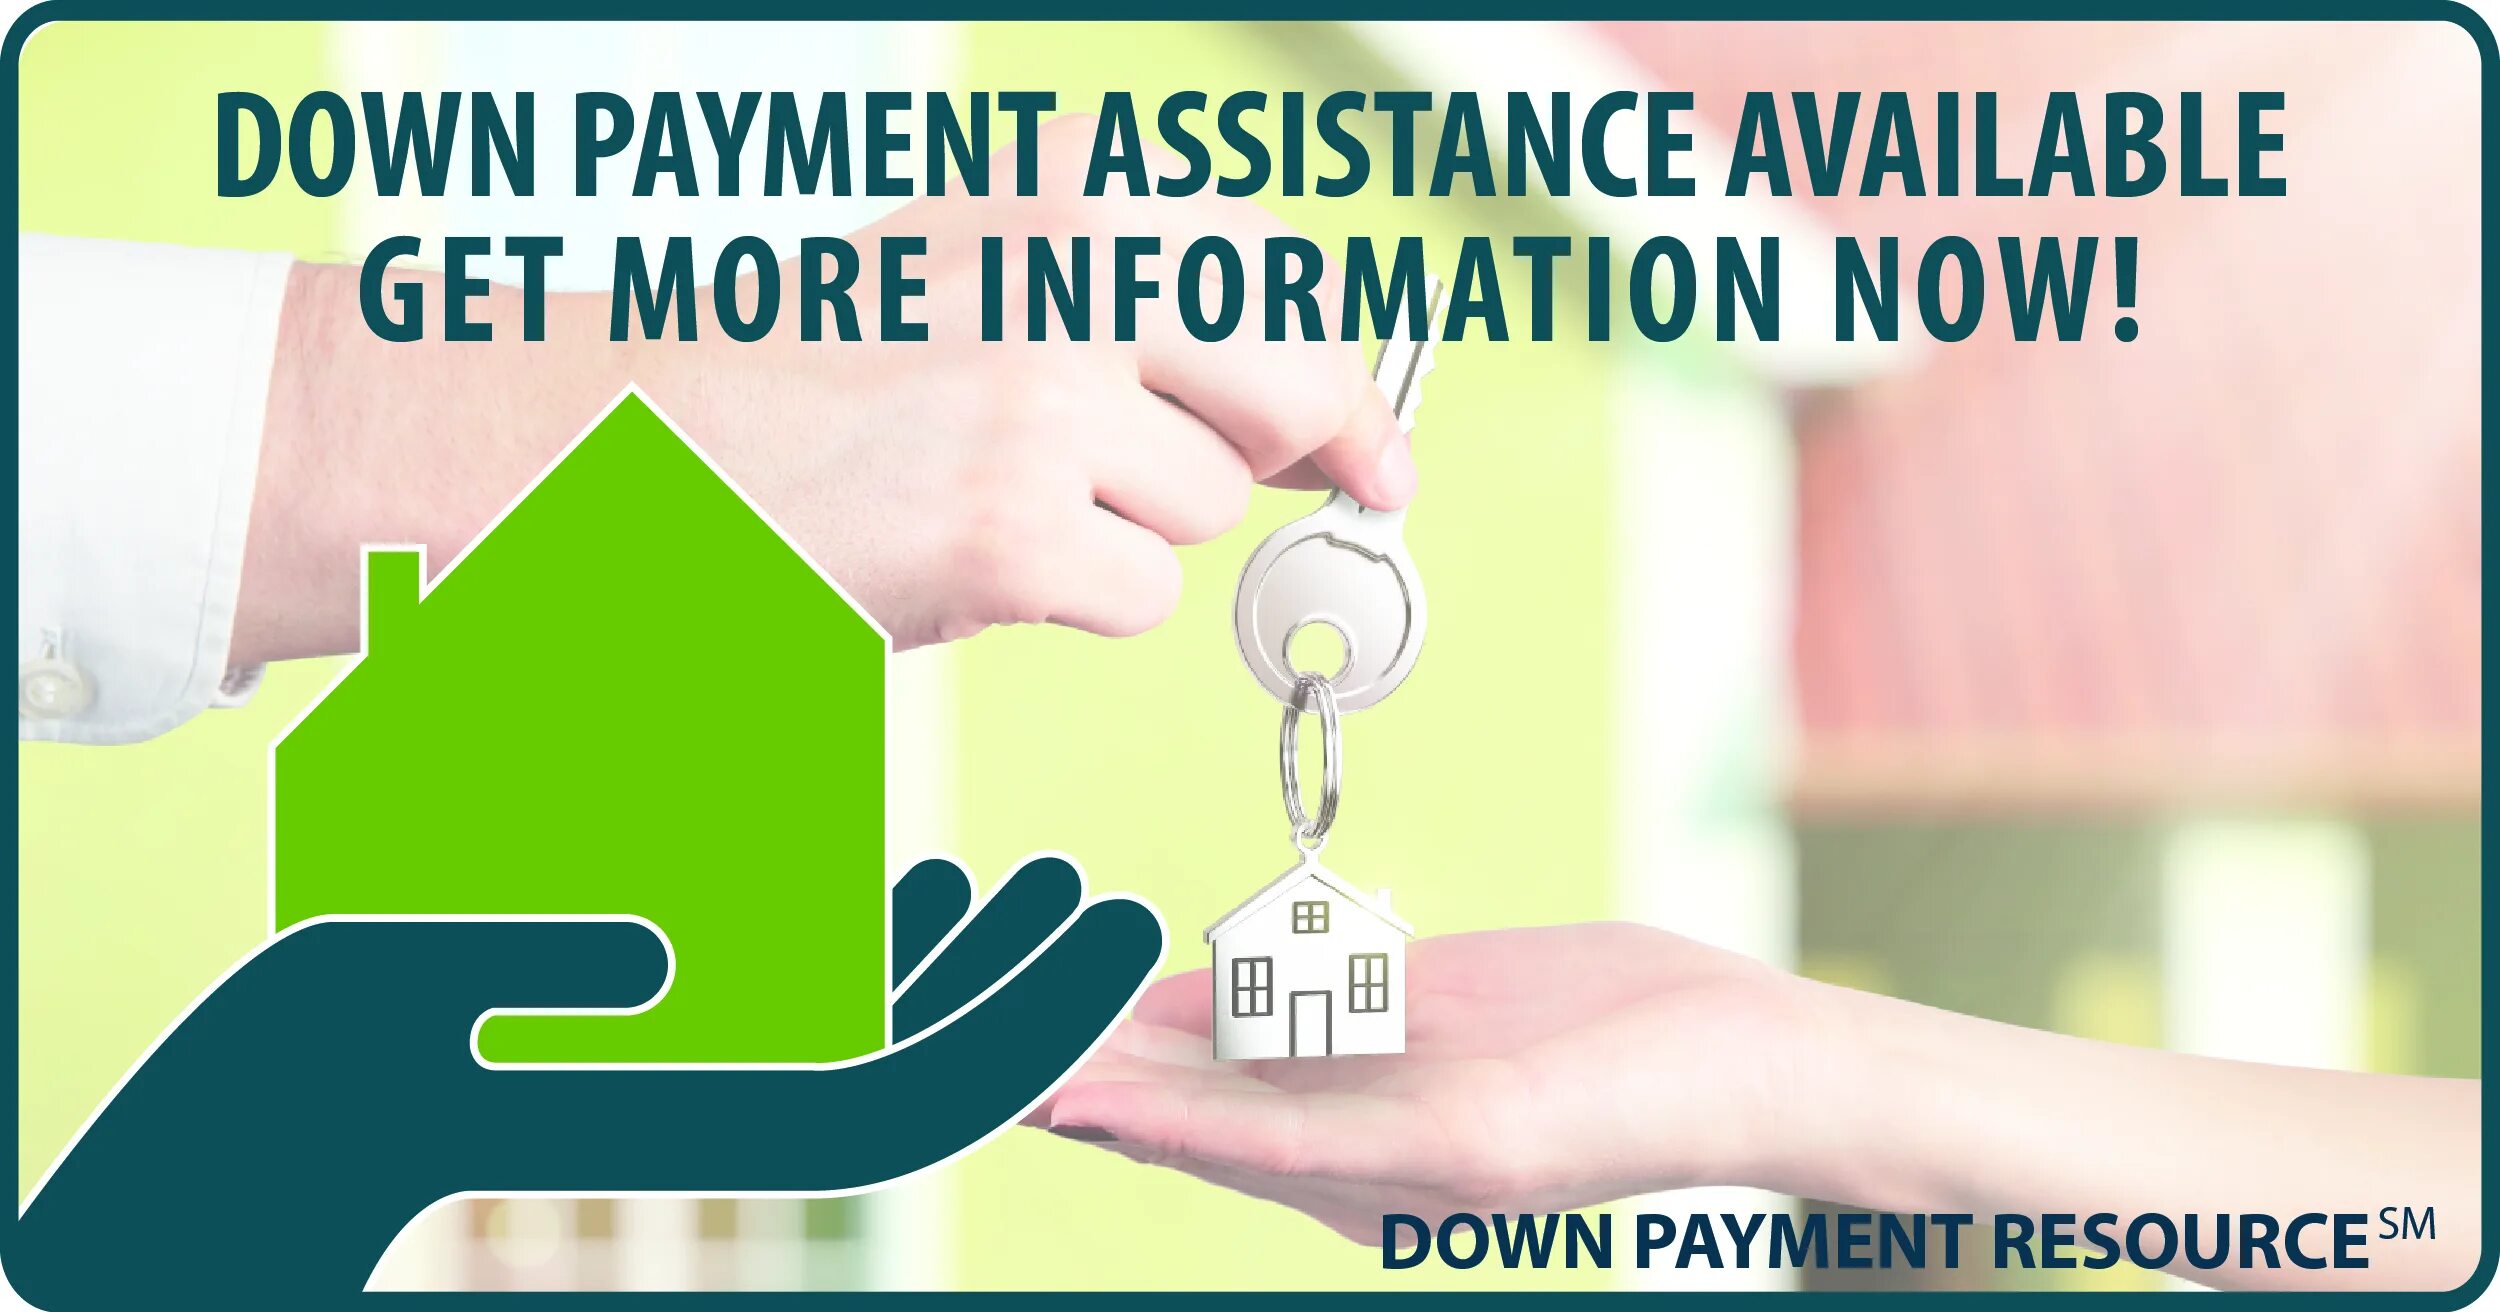 Down payment. Payment assistance. Assist pay. Pay Assistant.